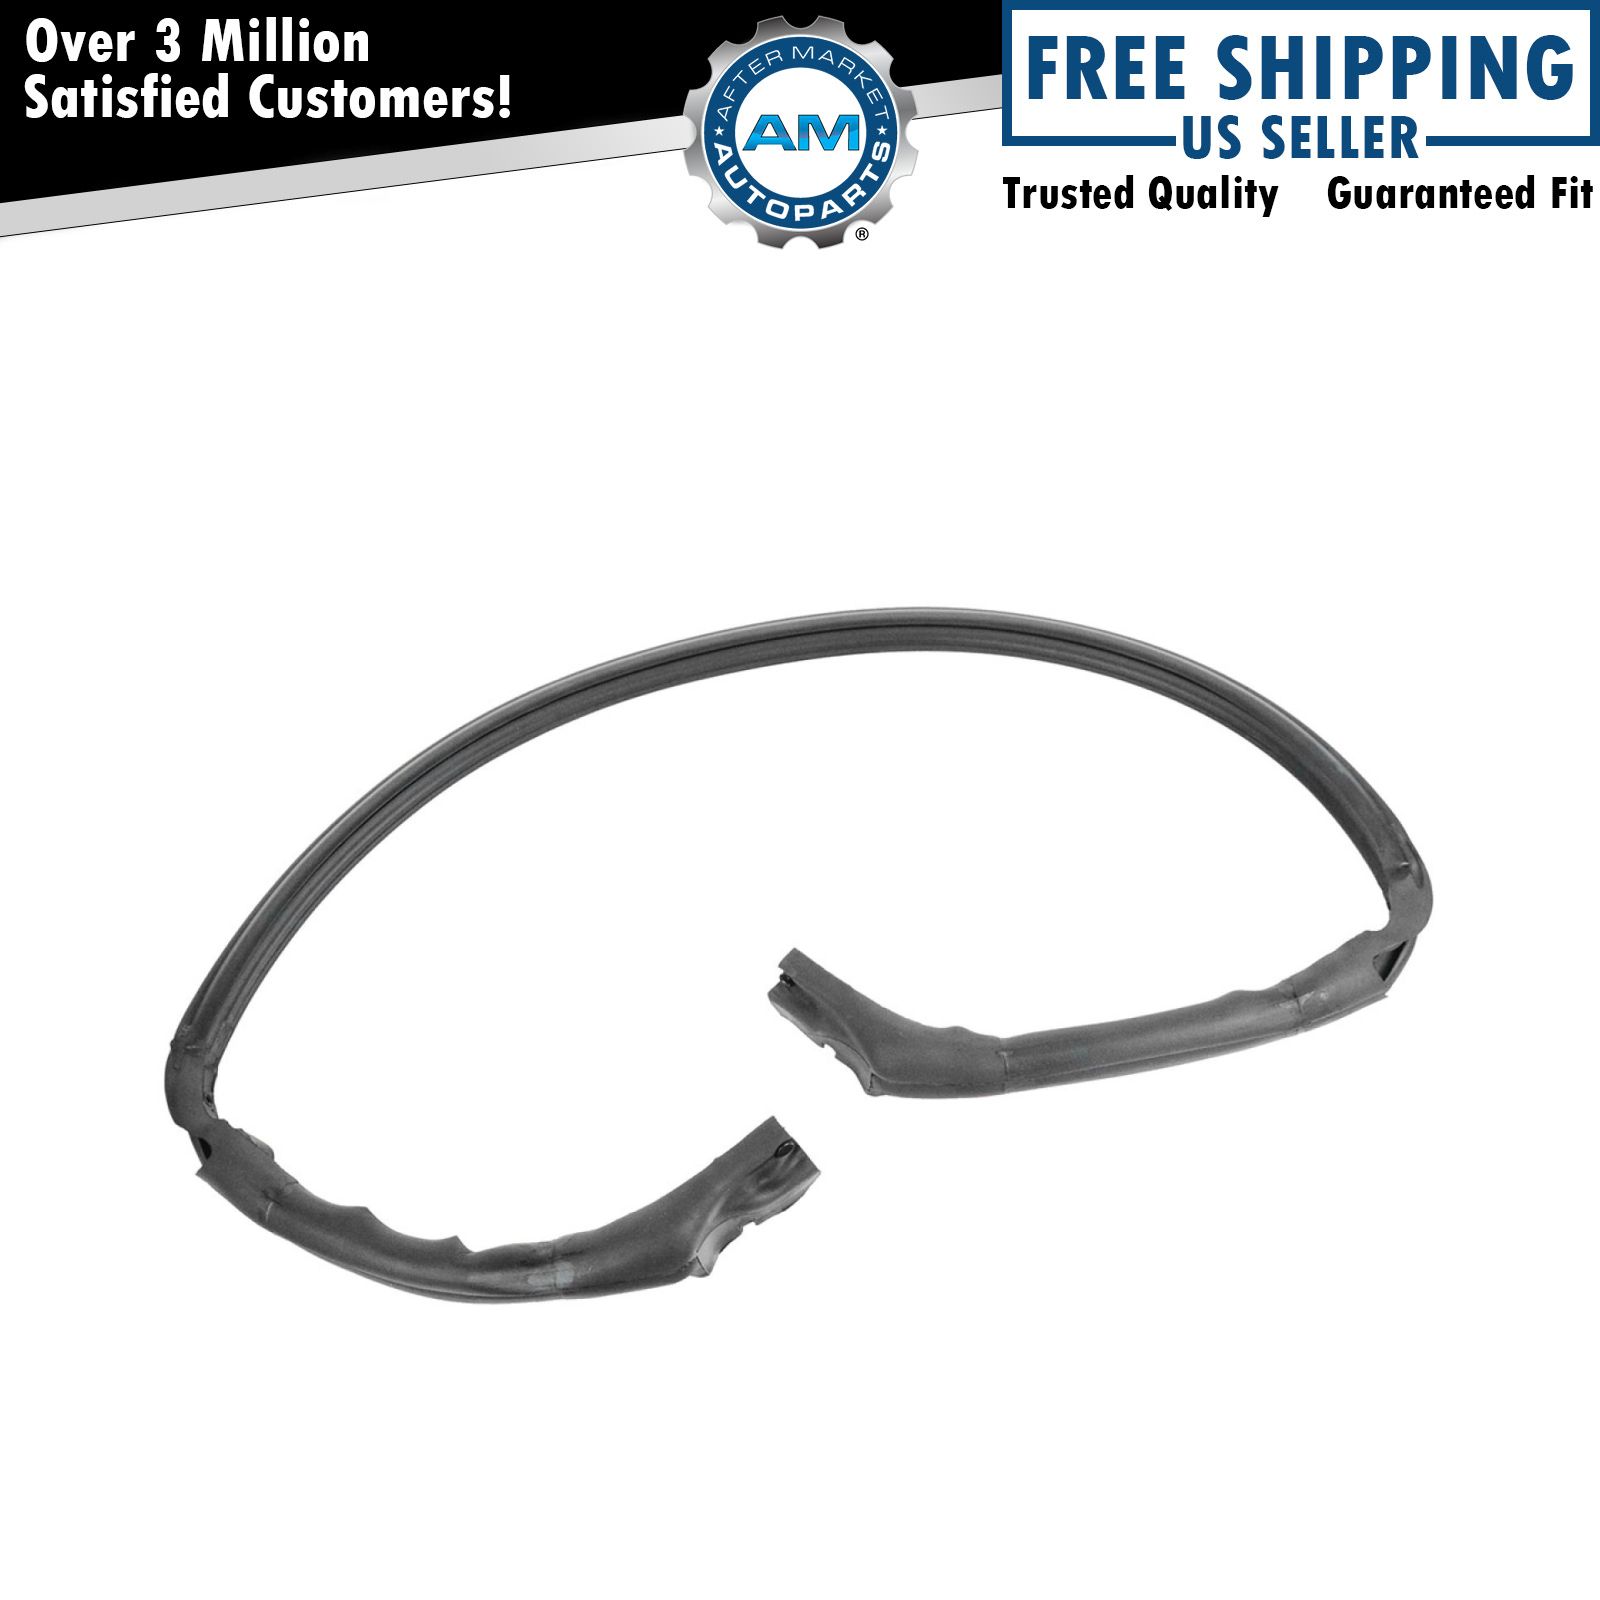 Weatherstrip Seal Gasket Targa Top Rear for 97-04 Chevy Corvette Coupe